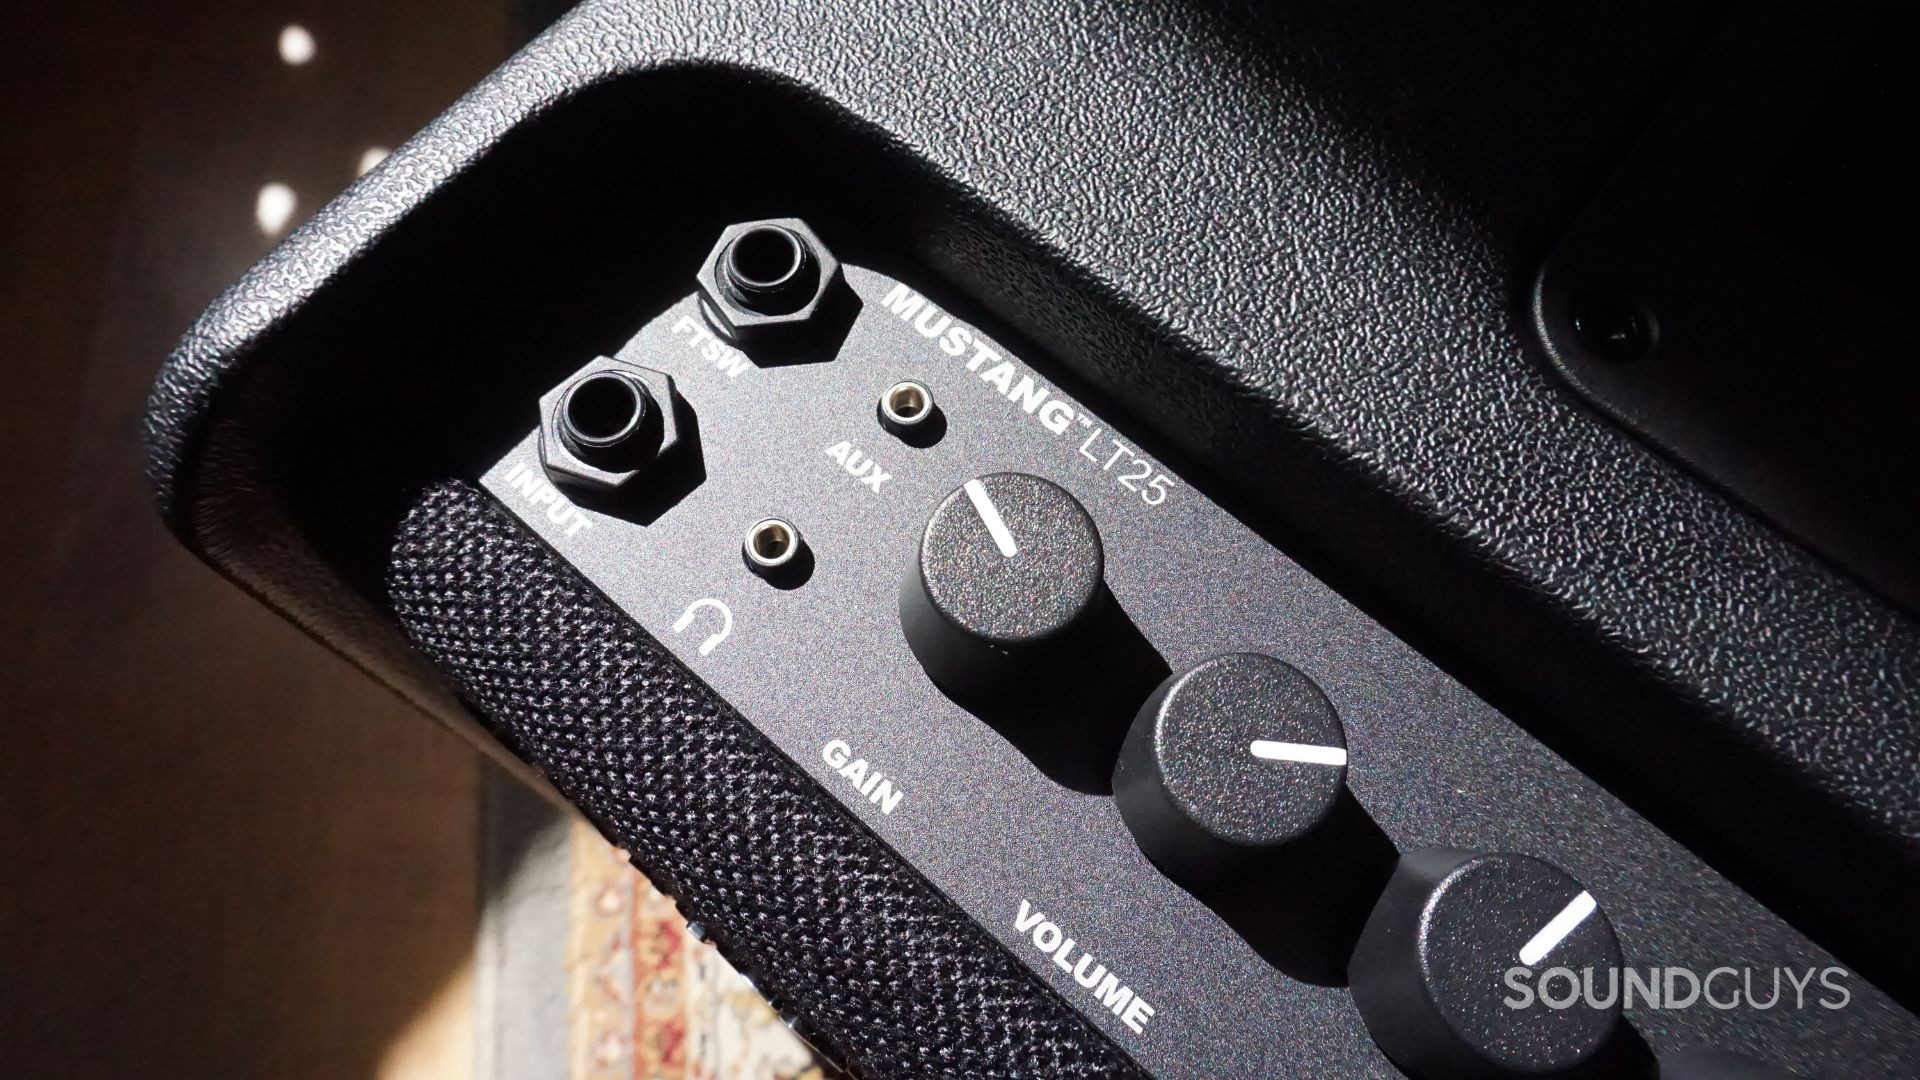 The Fender Mustang LT25 has an aux input so you can play along with your favorite songs